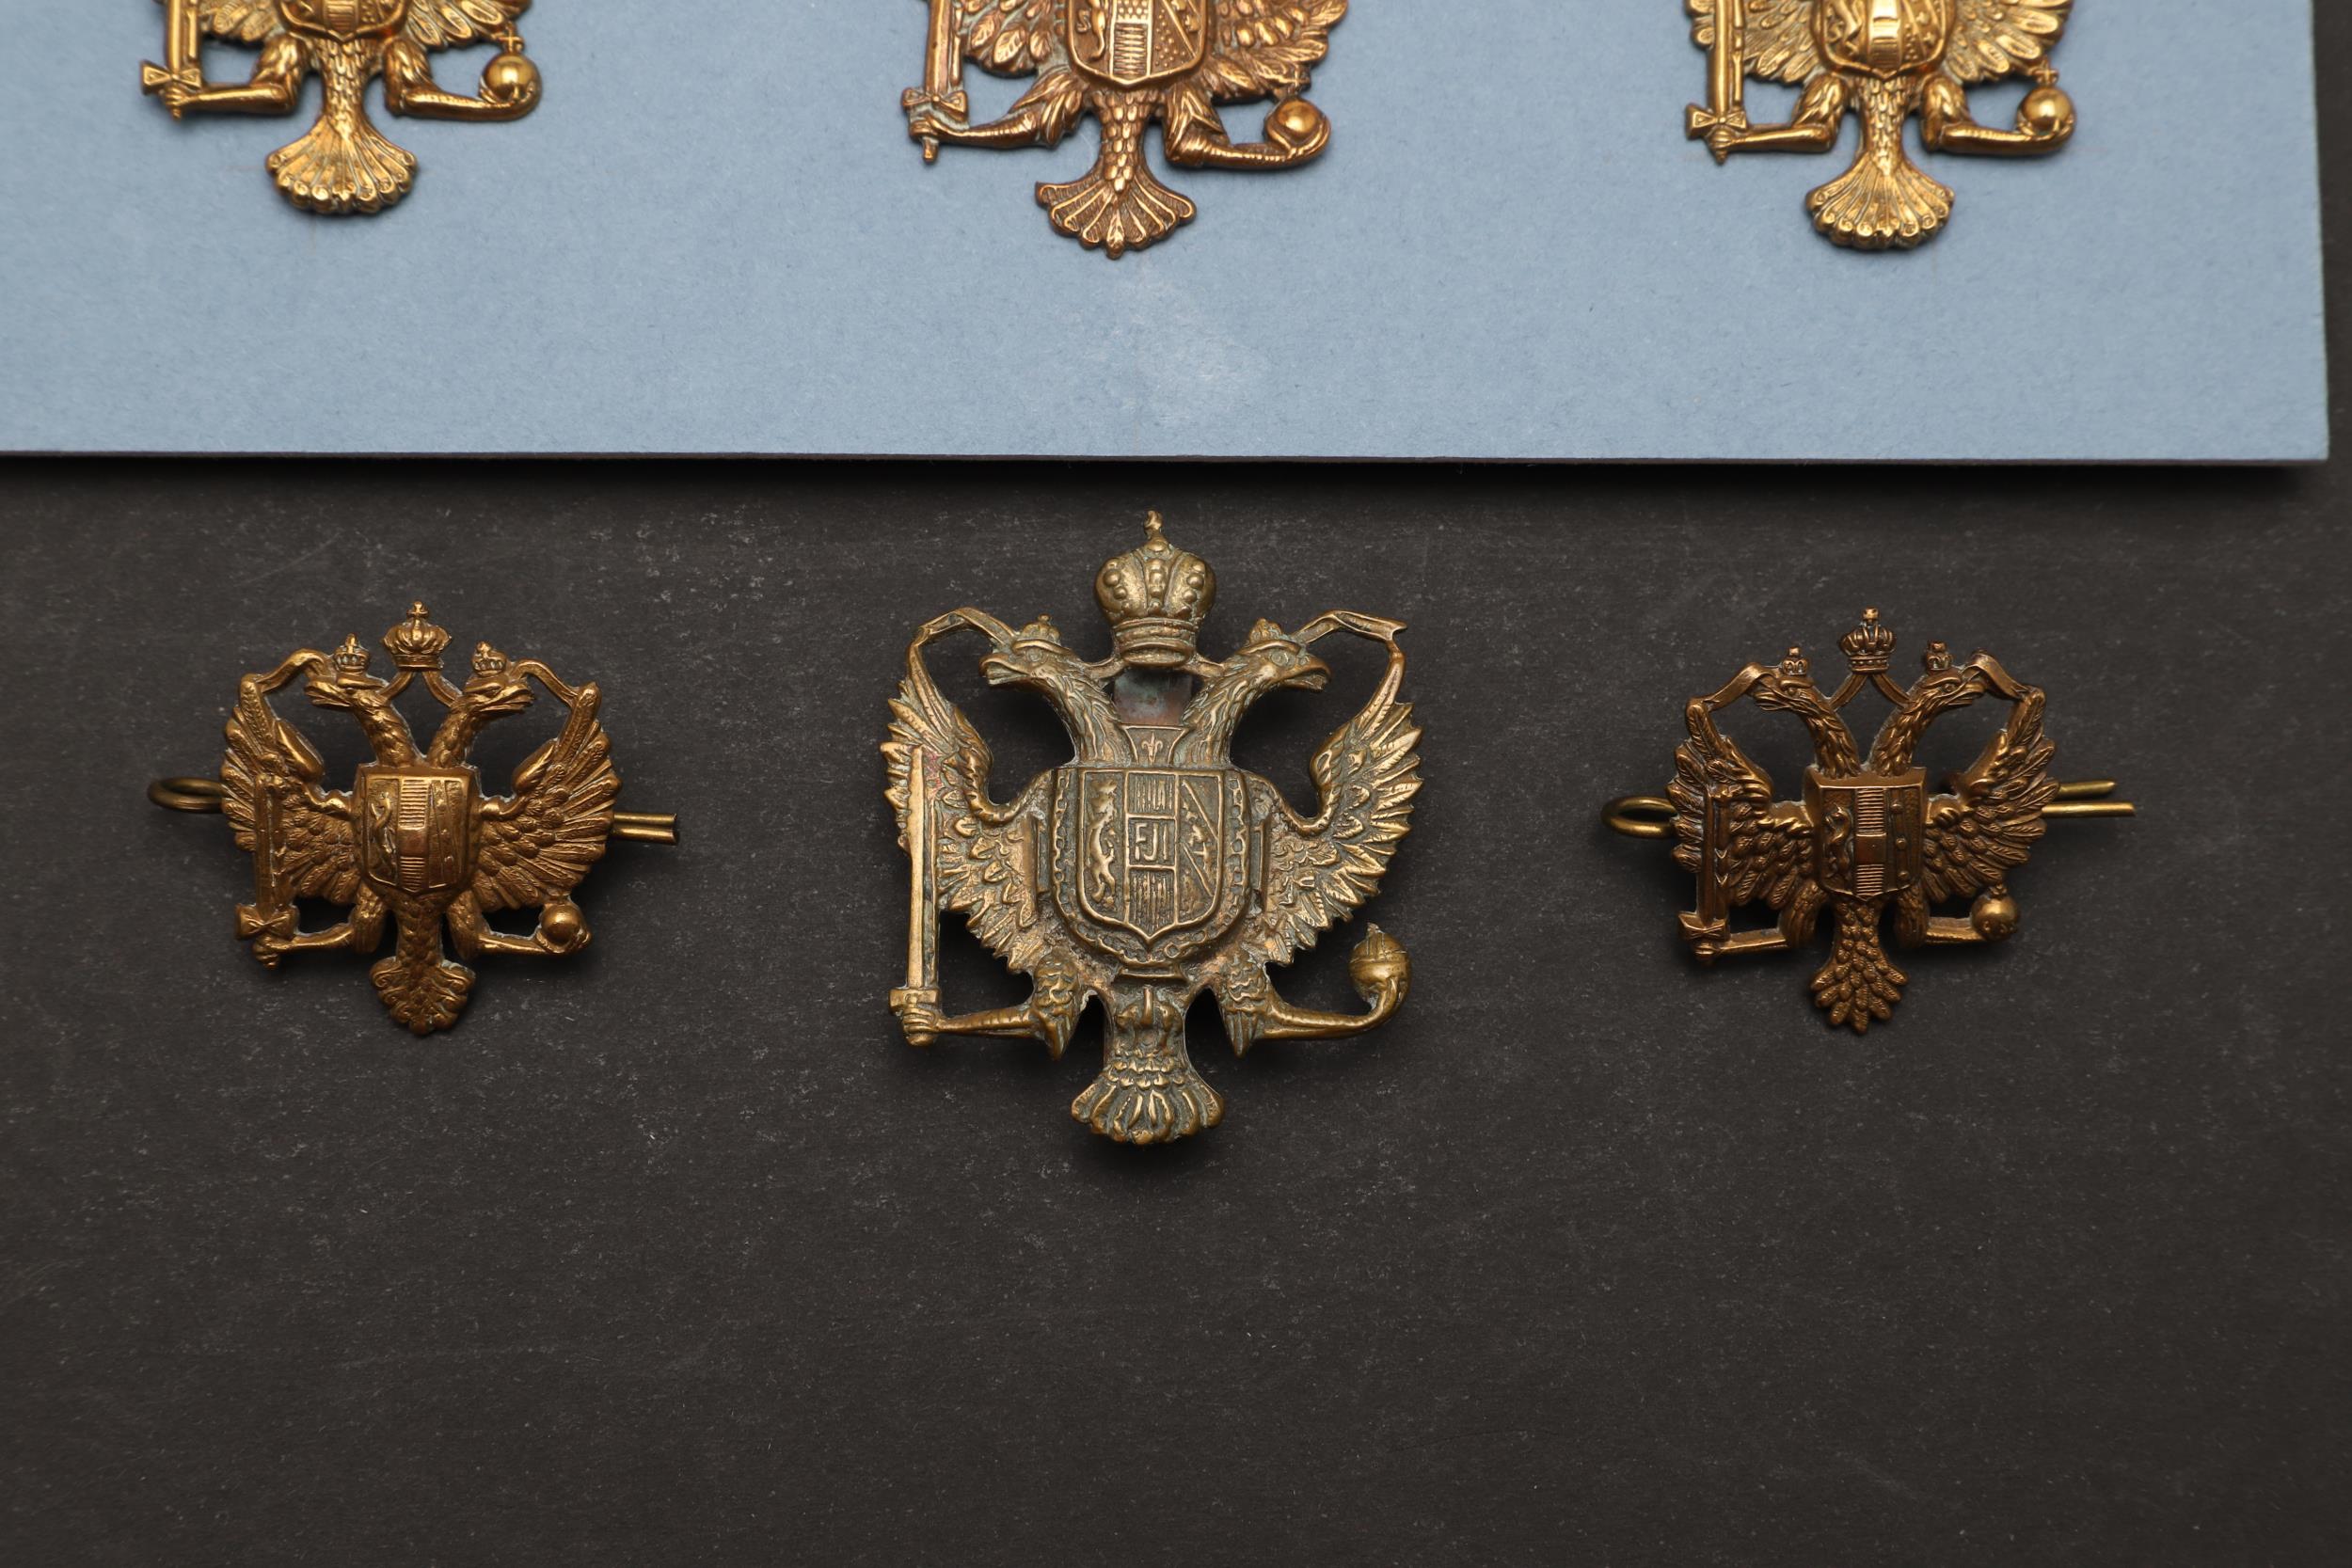 AN INTERESTING COLLECTION OF 1ST KING'S DRAGOON GUARDS CAP AND COLLAR BADGES. - Image 3 of 4